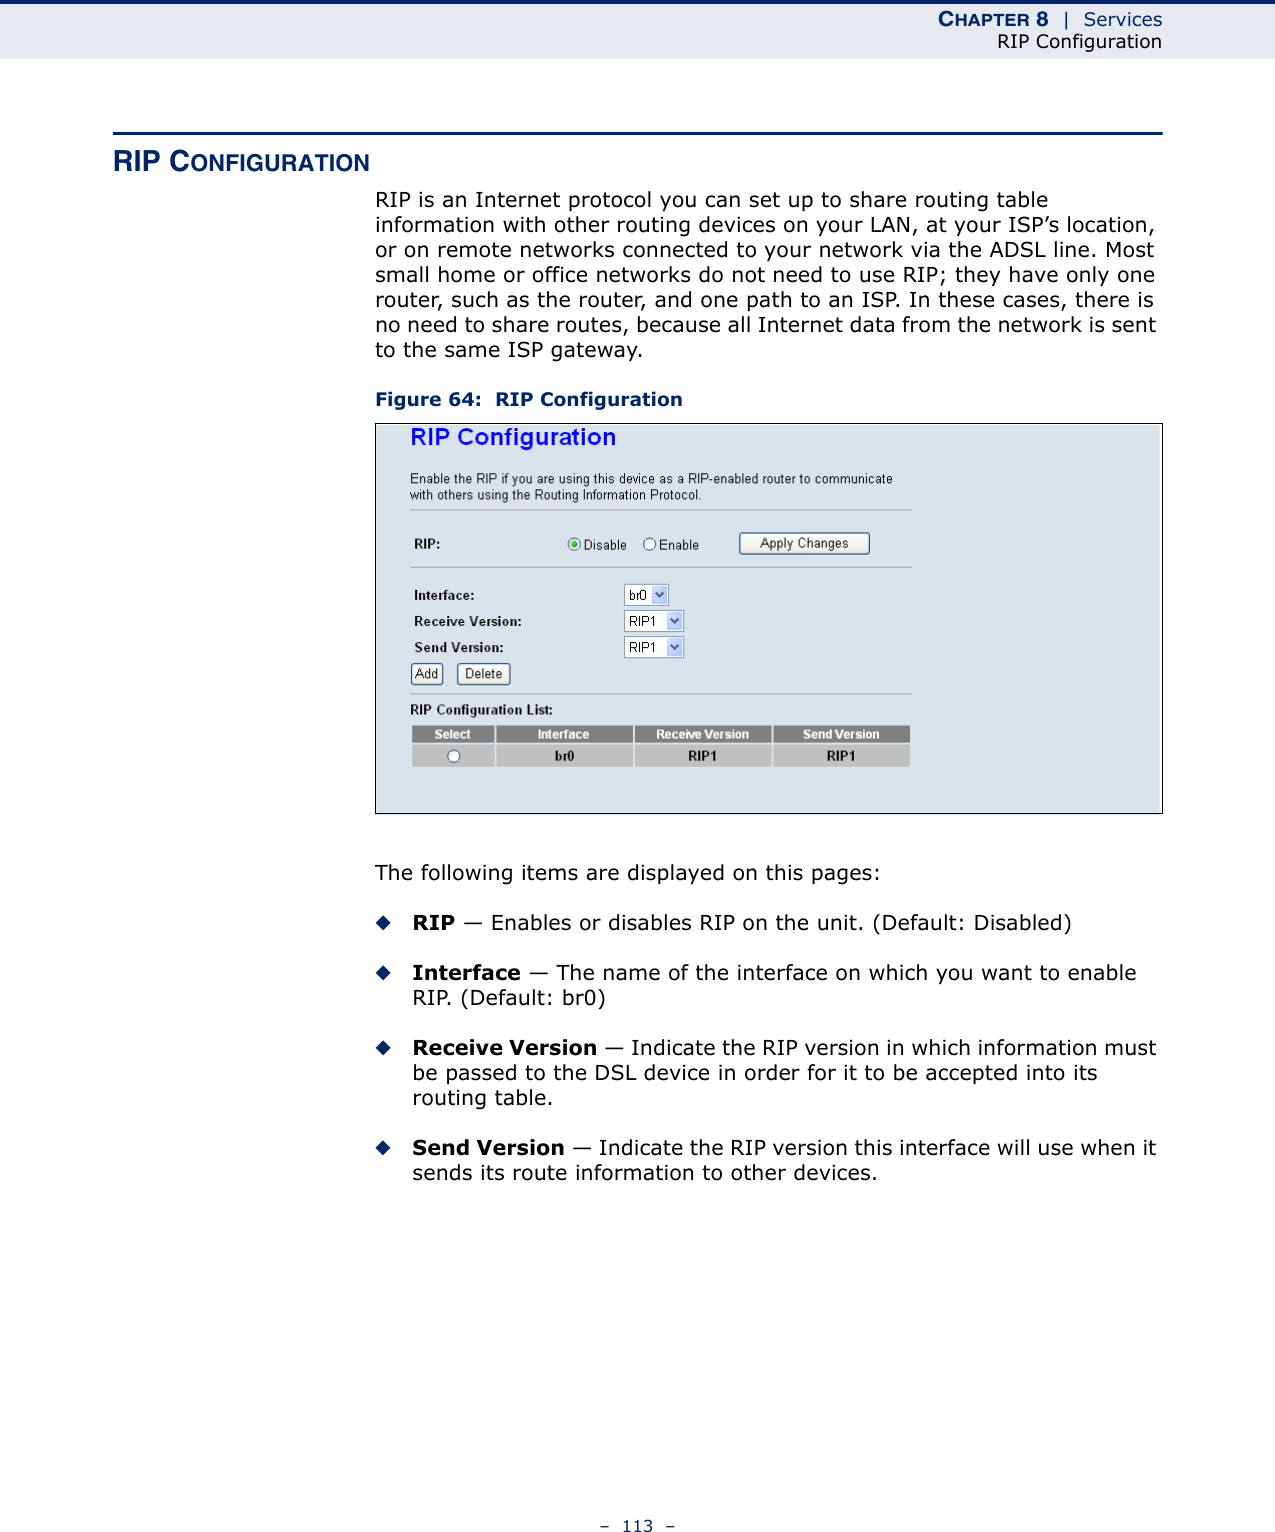 CHAPTER 8  |  ServicesRIP Configuration–  113  –RIP CONFIGURATIONRIP is an Internet protocol you can set up to share routing table information with other routing devices on your LAN, at your ISP’s location, or on remote networks connected to your network via the ADSL line. Most small home or office networks do not need to use RIP; they have only one router, such as the router, and one path to an ISP. In these cases, there is no need to share routes, because all Internet data from the network is sent to the same ISP gateway. Figure 64:  RIP ConfigurationThe following items are displayed on this pages:◆RIP — Enables or disables RIP on the unit. (Default: Disabled)◆Interface — The name of the interface on which you want to enable RIP. (Default: br0)◆Receive Version — Indicate the RIP version in which information must be passed to the DSL device in order for it to be accepted into its routing table. ◆Send Version — Indicate the RIP version this interface will use when it sends its route information to other devices. 